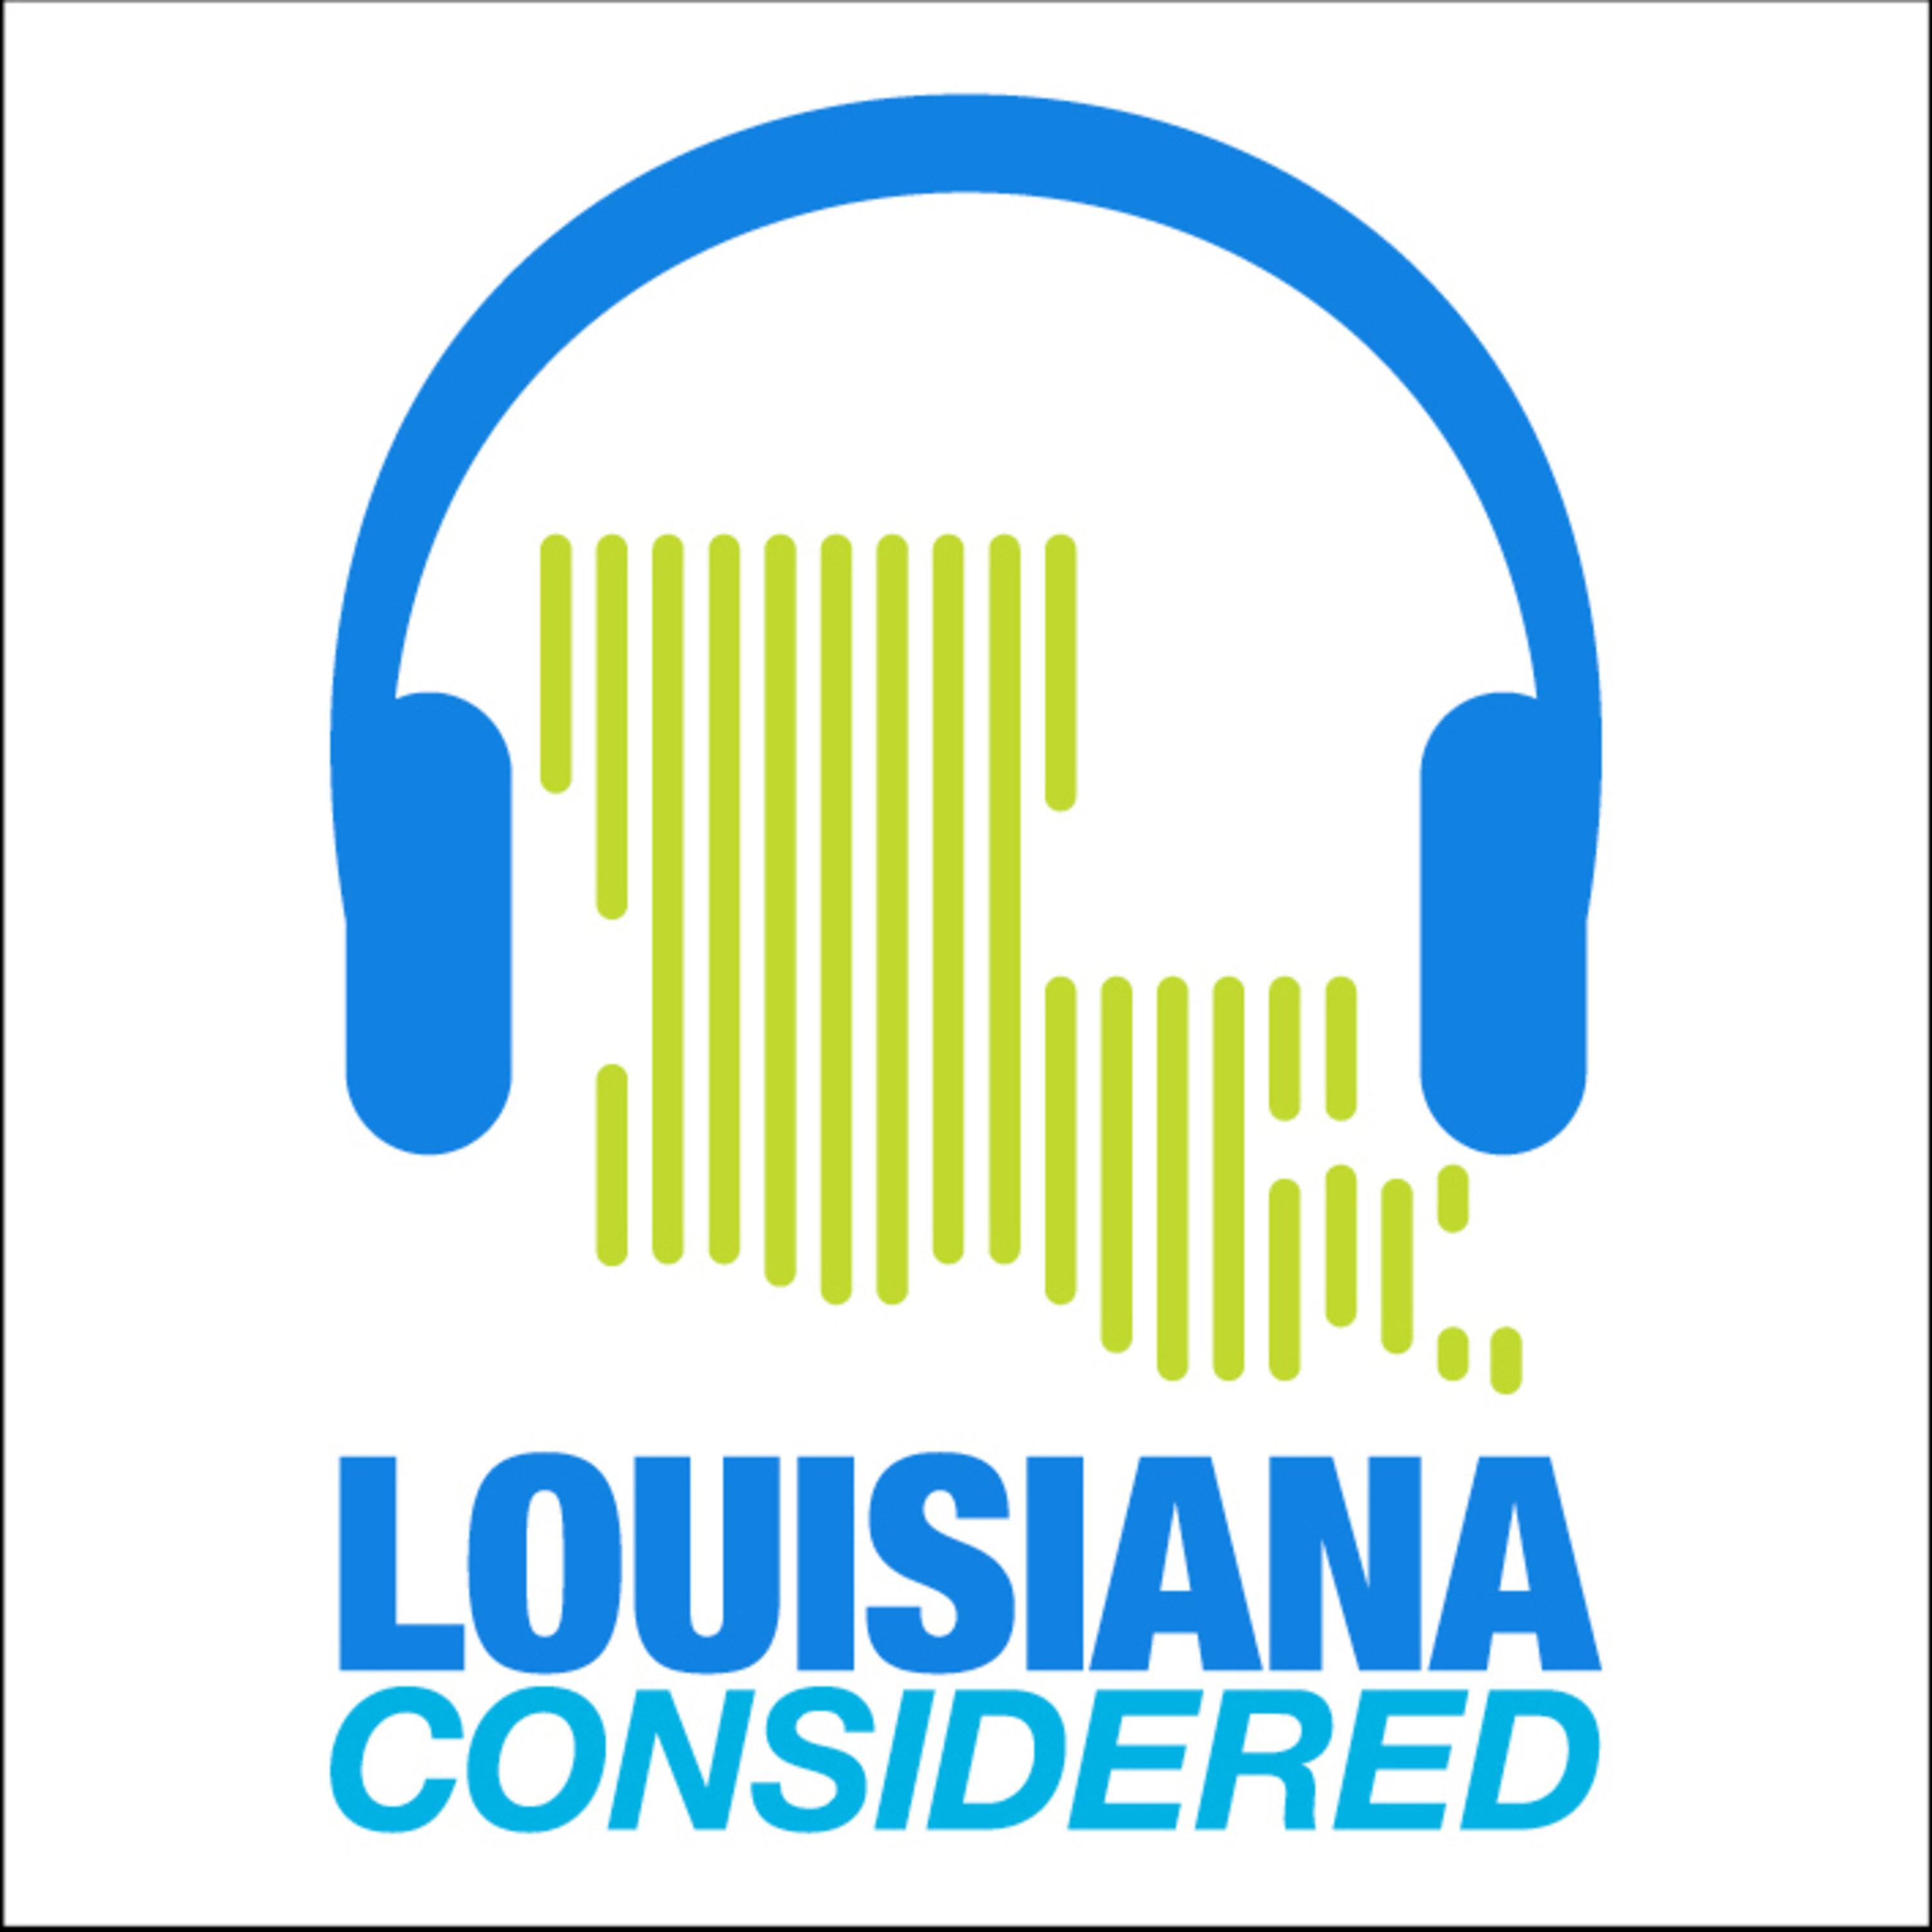 Thumbnail for "Louisiana Considered: Louisiana’s Eviction Crisis, Possible Veto Override Session, Vaccinating Undocumented Workers, The Blessing Of The Fleet, Jazz Fest 2021".